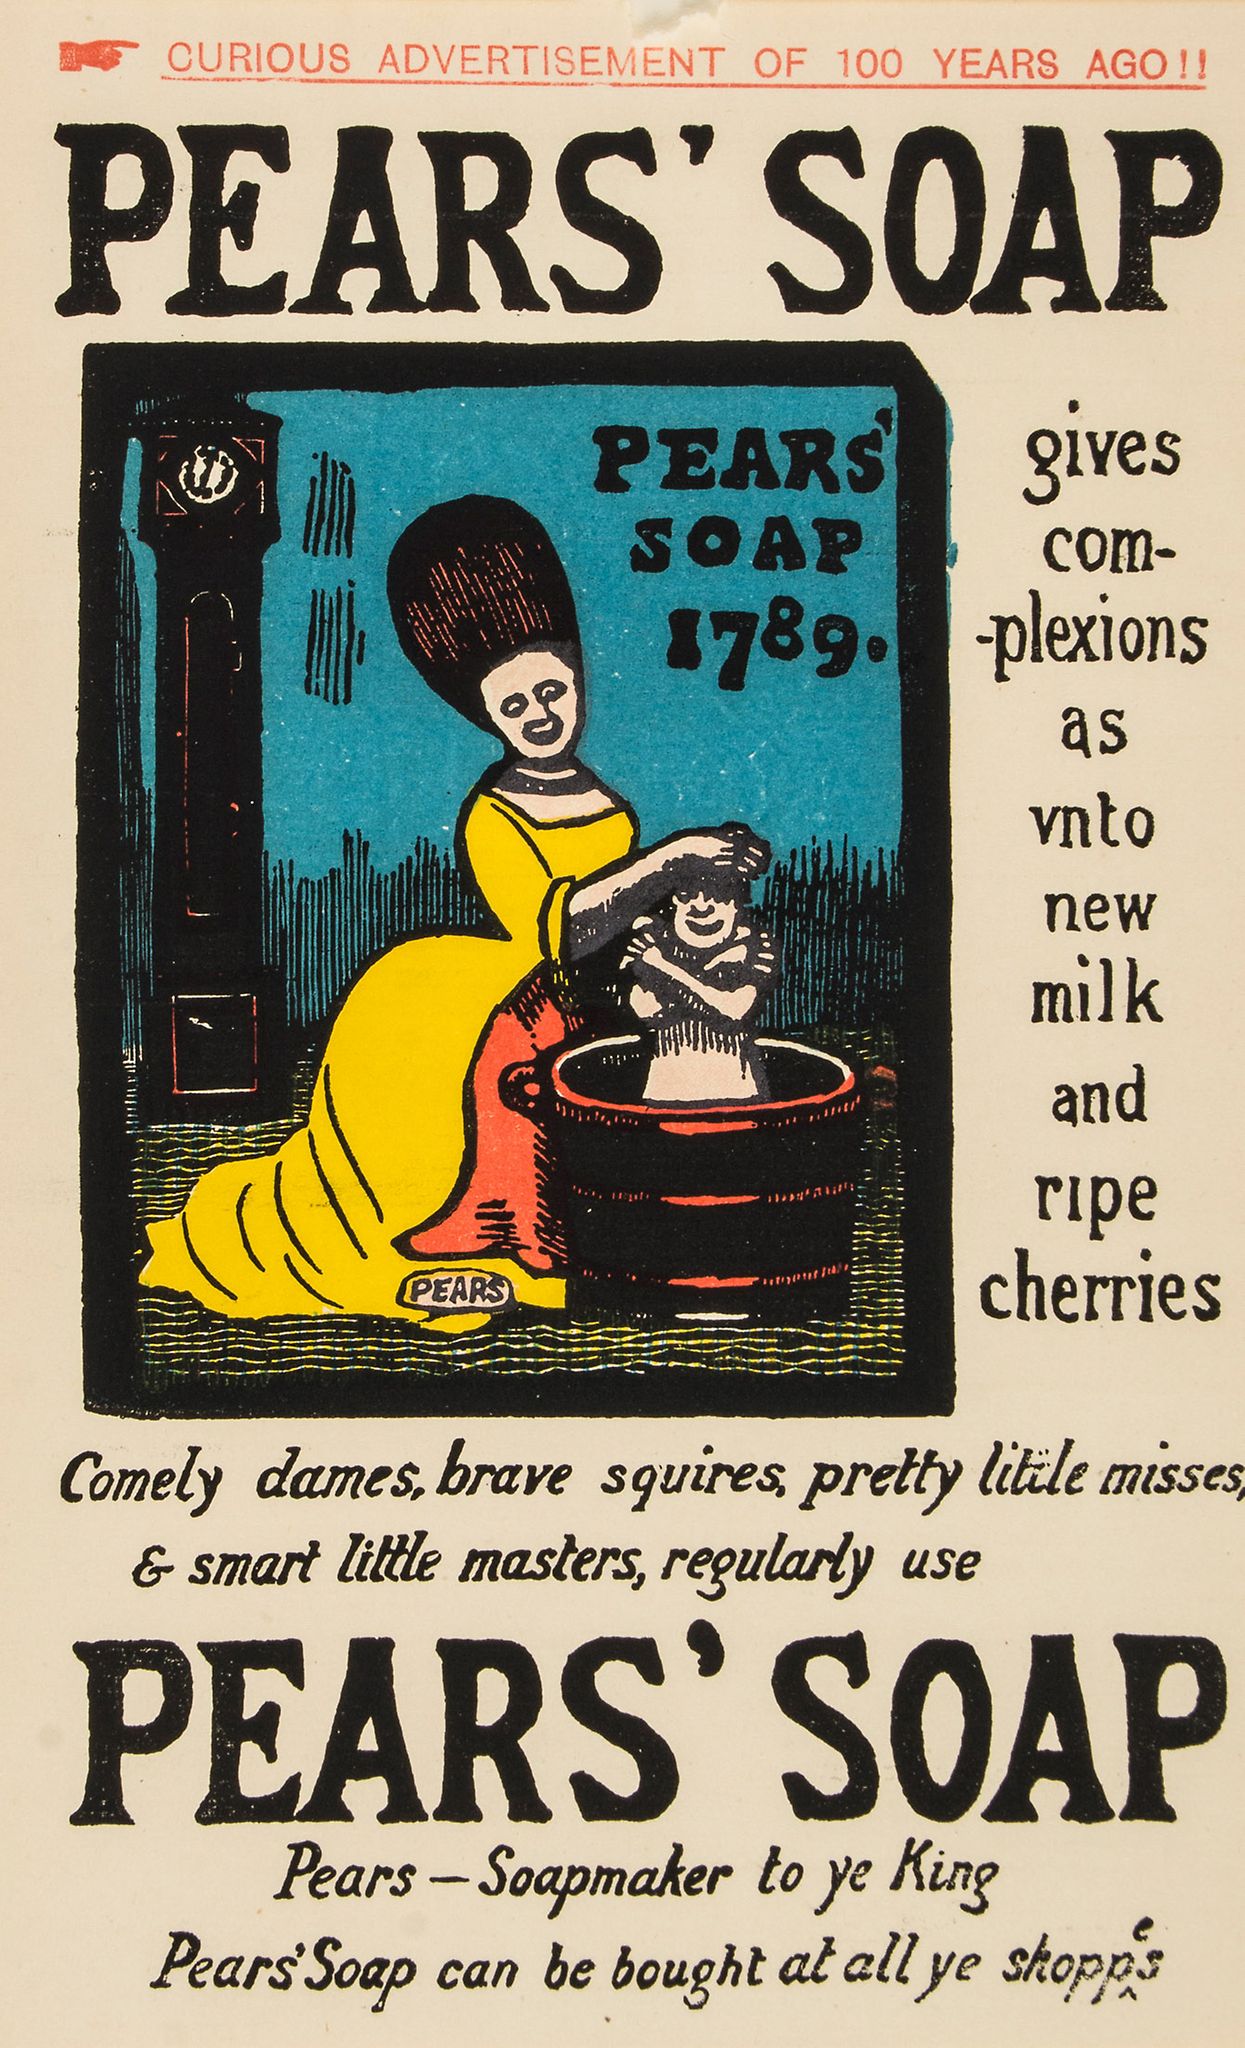 ** Crawhall II (Joseph).- - "Curious Advertisement of 100 years ago!! Pears' Soap gives